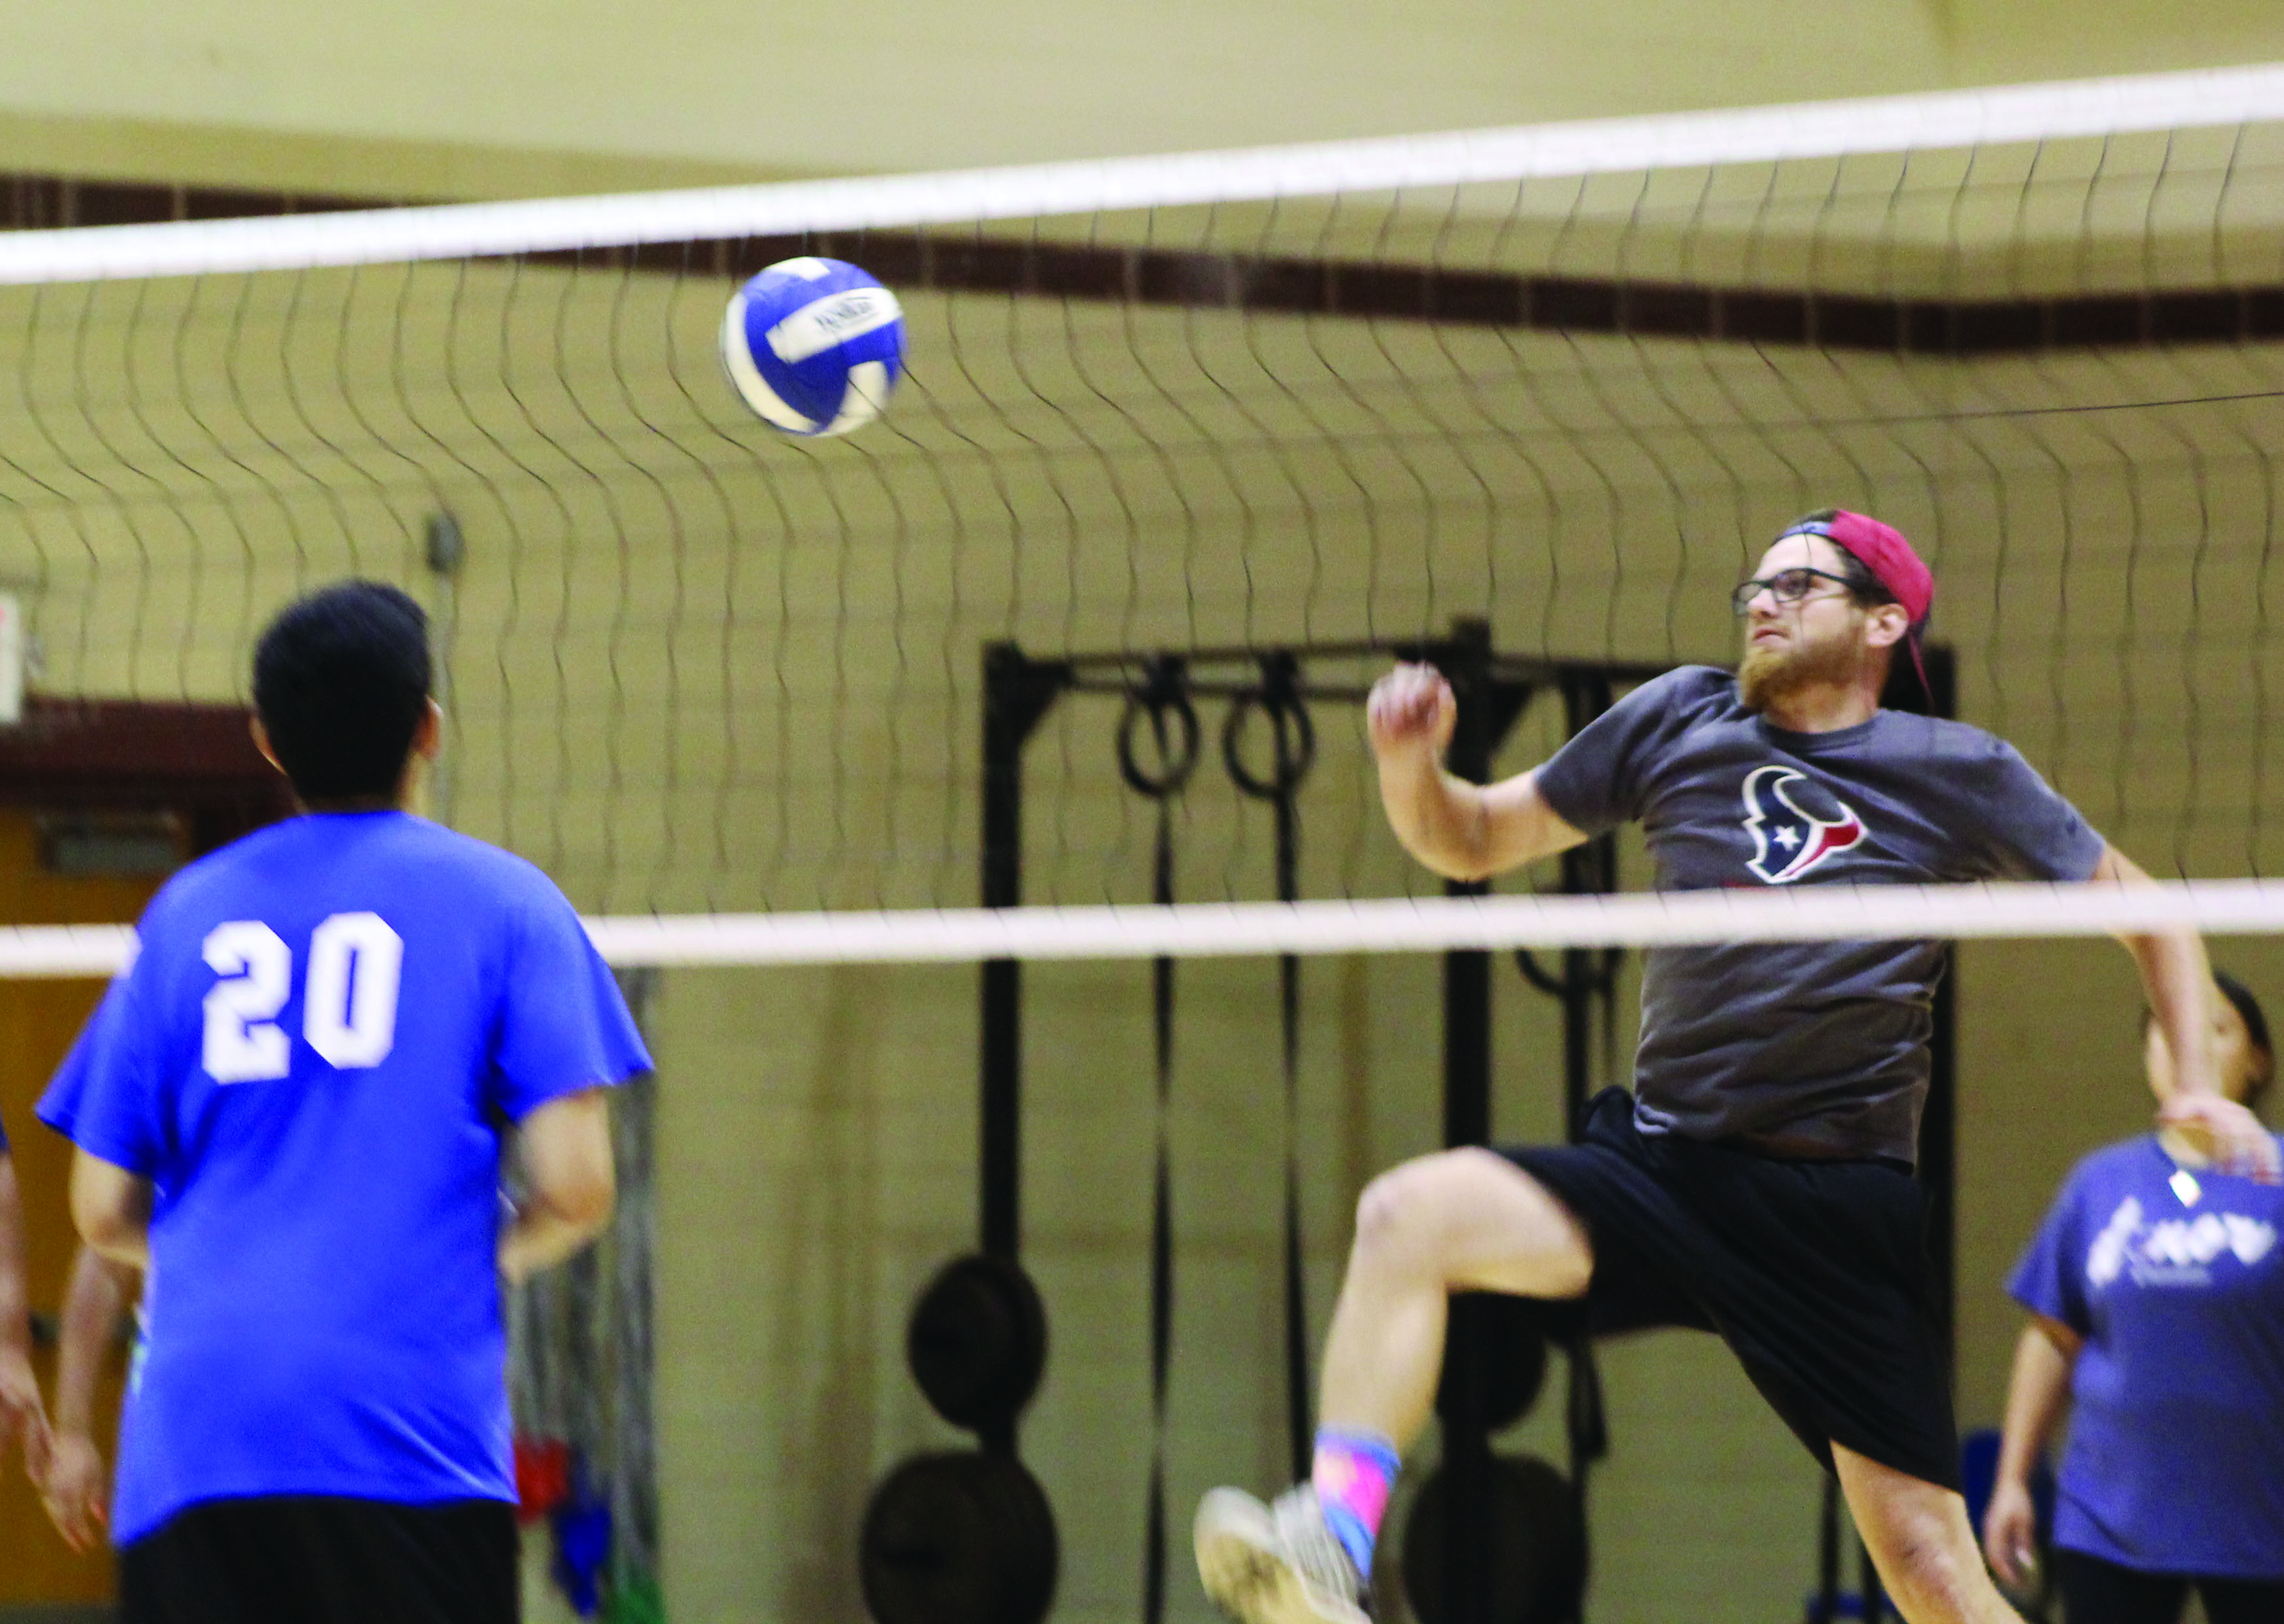 Volleyball tourney kicks off intramural sports